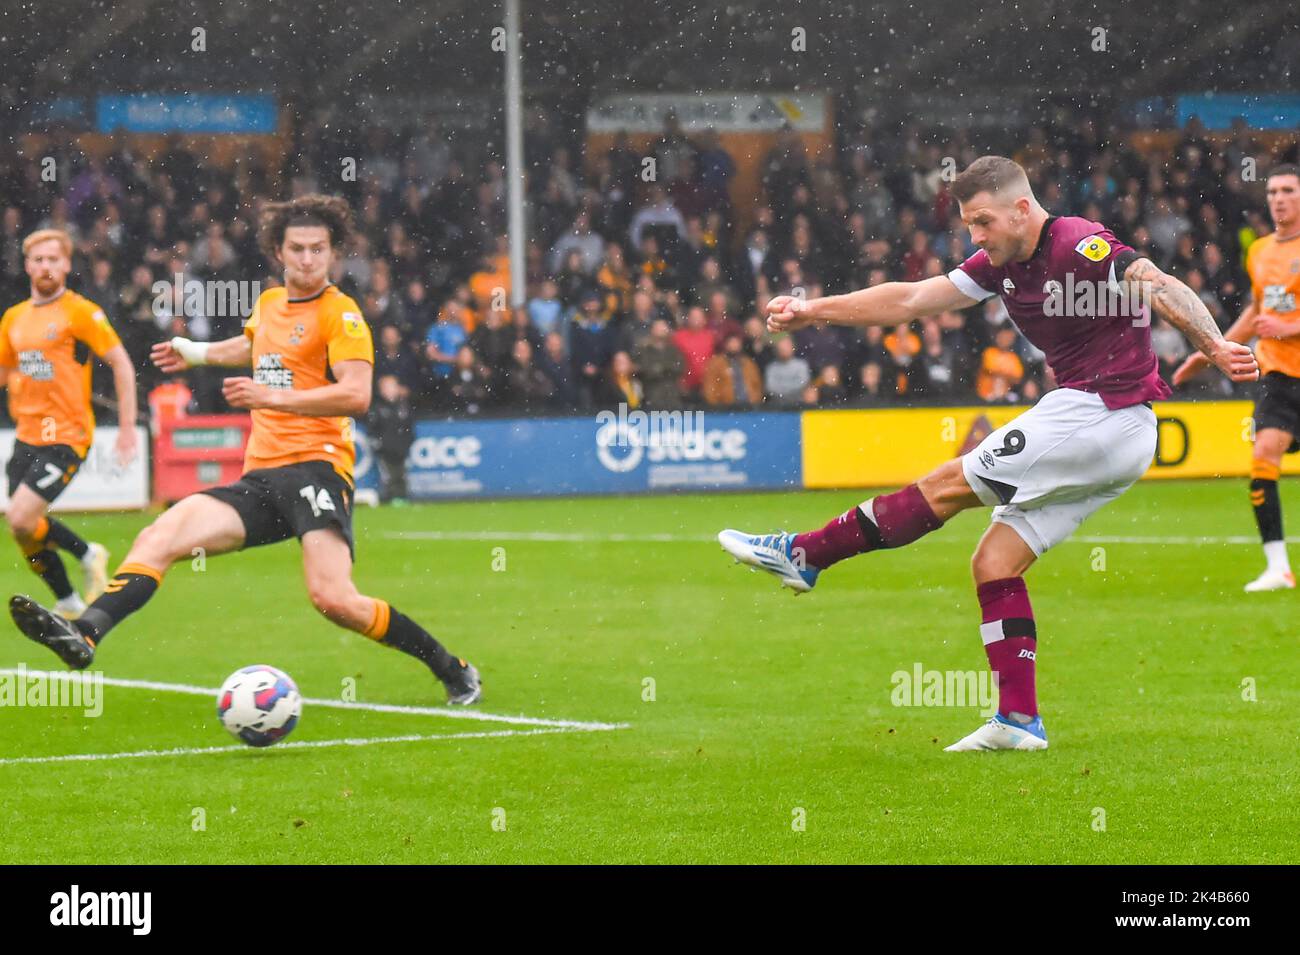 Cambridge, UK. 1st October 2022James Collins (9 Derby) shoots and scores his second goal during the Sky Bet League 1 match between Cambridge United and Derby County at the R Costings Abbey Stadium, Cambridge on Saturday 1st October 2022. (Credit: Kevin Hodgson | MI News) Credit: MI News & Sport /Alamy Live News Stock Photo